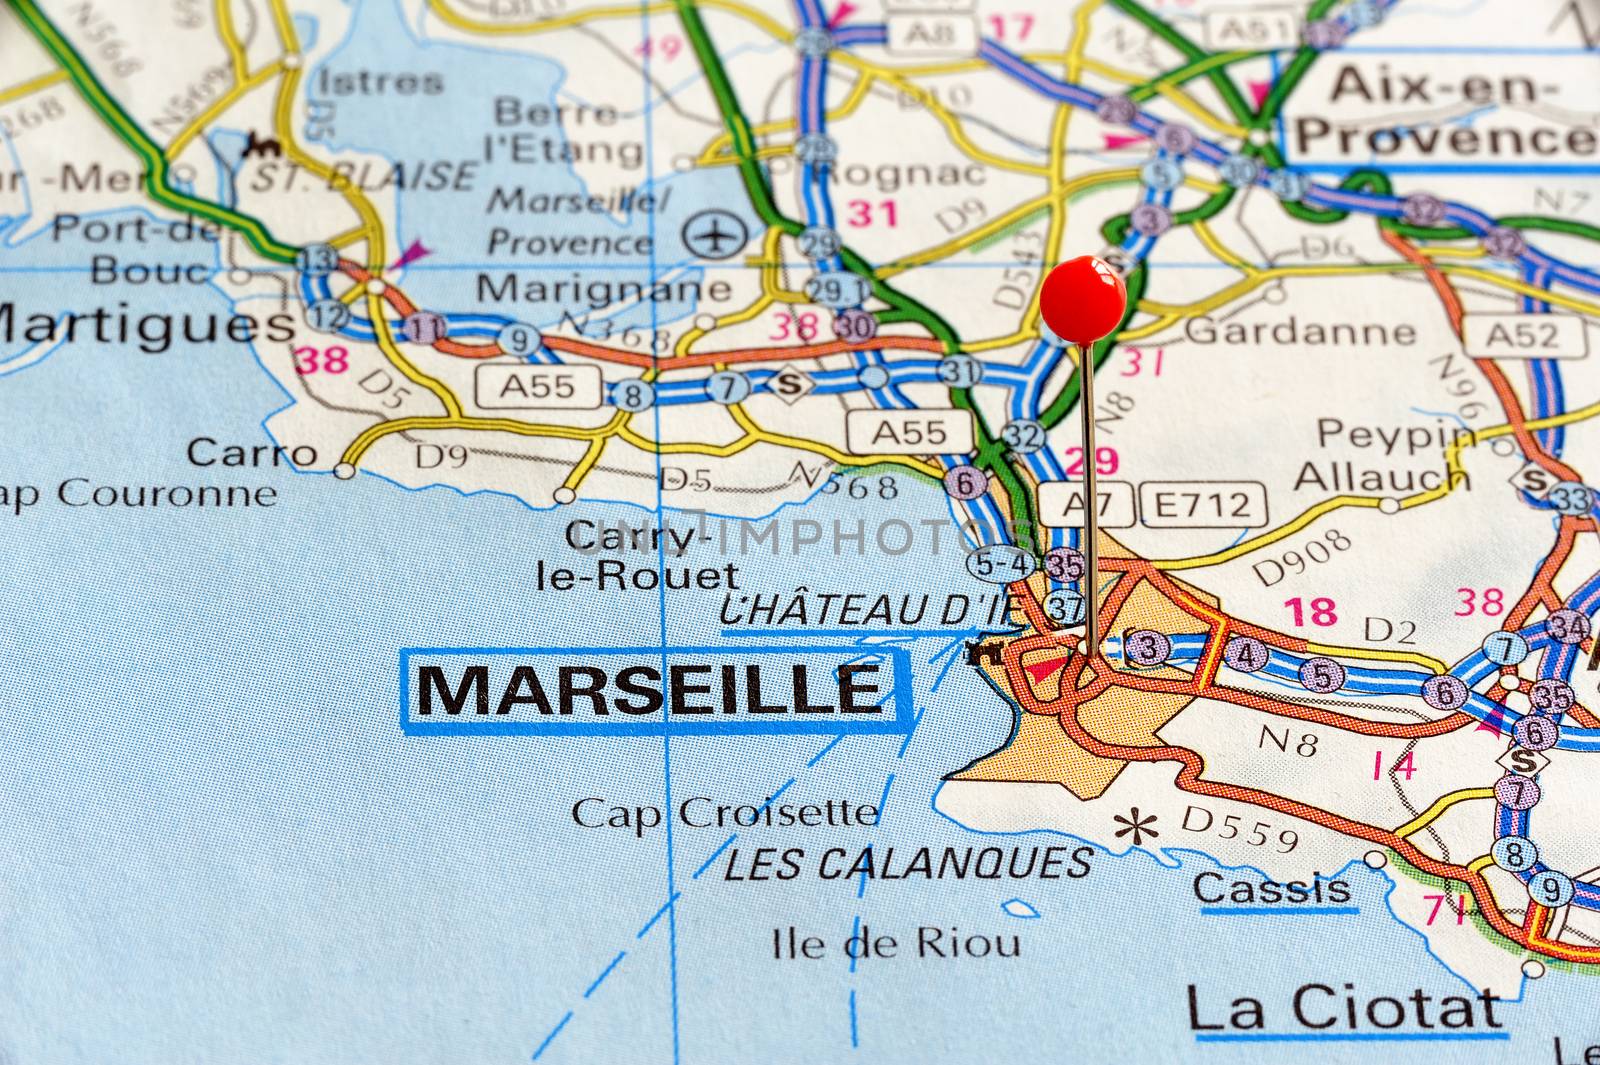 Marseille on map by a40757